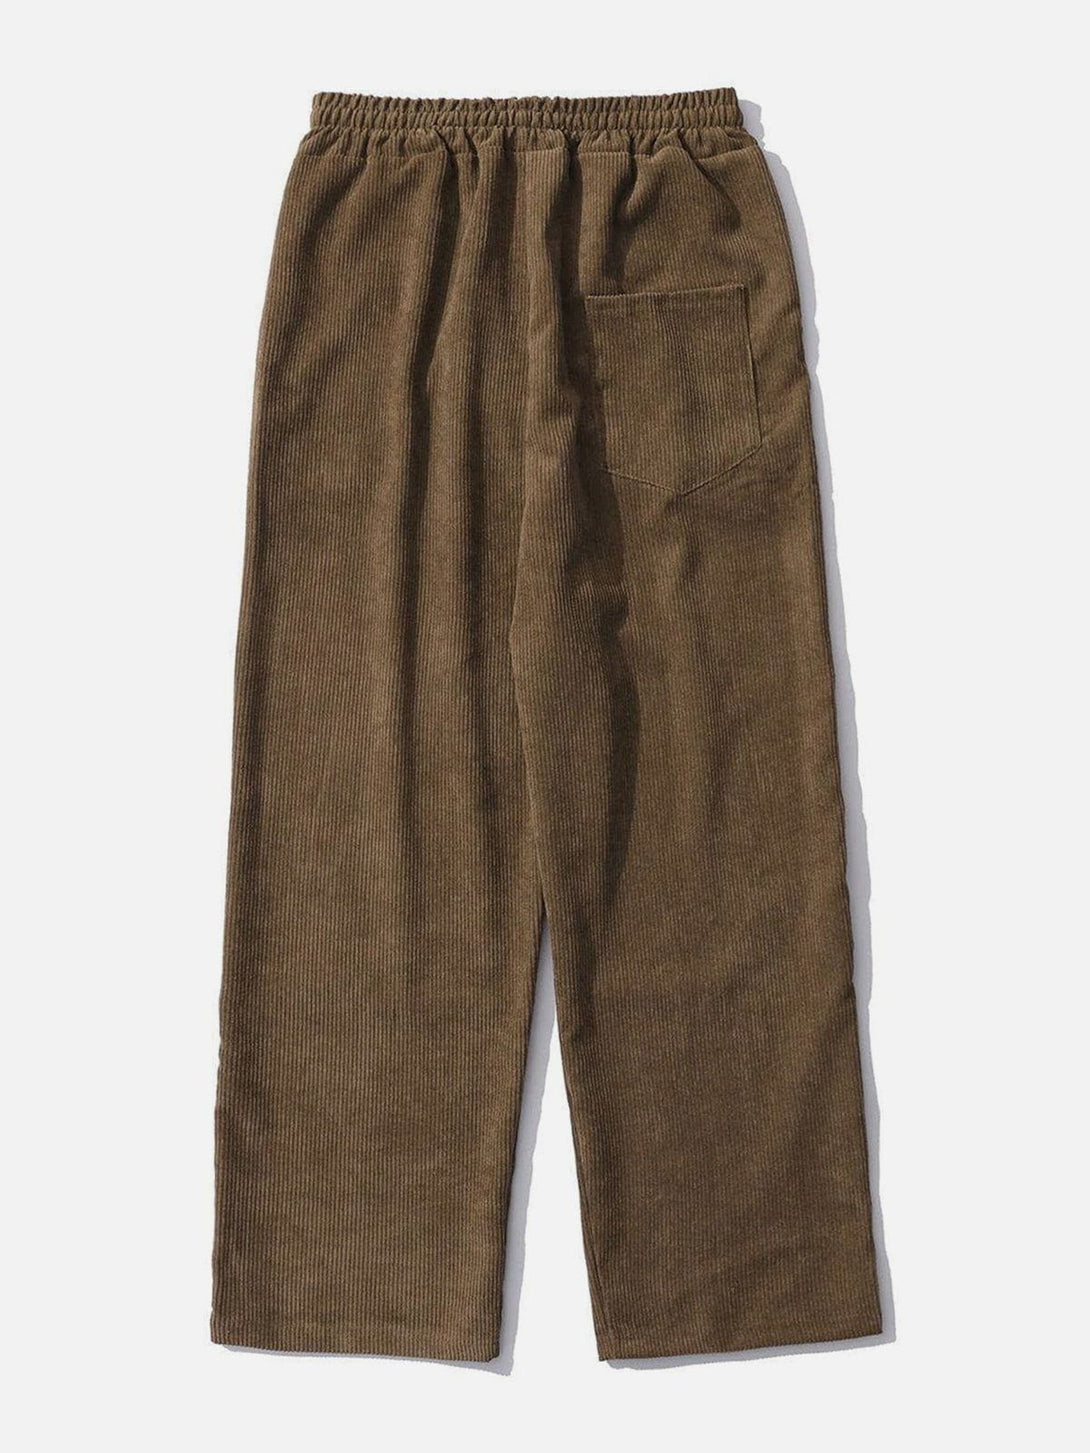 Levefly - Bee Embroidered Corduroy Pants - Streetwear Fashion - levefly.com